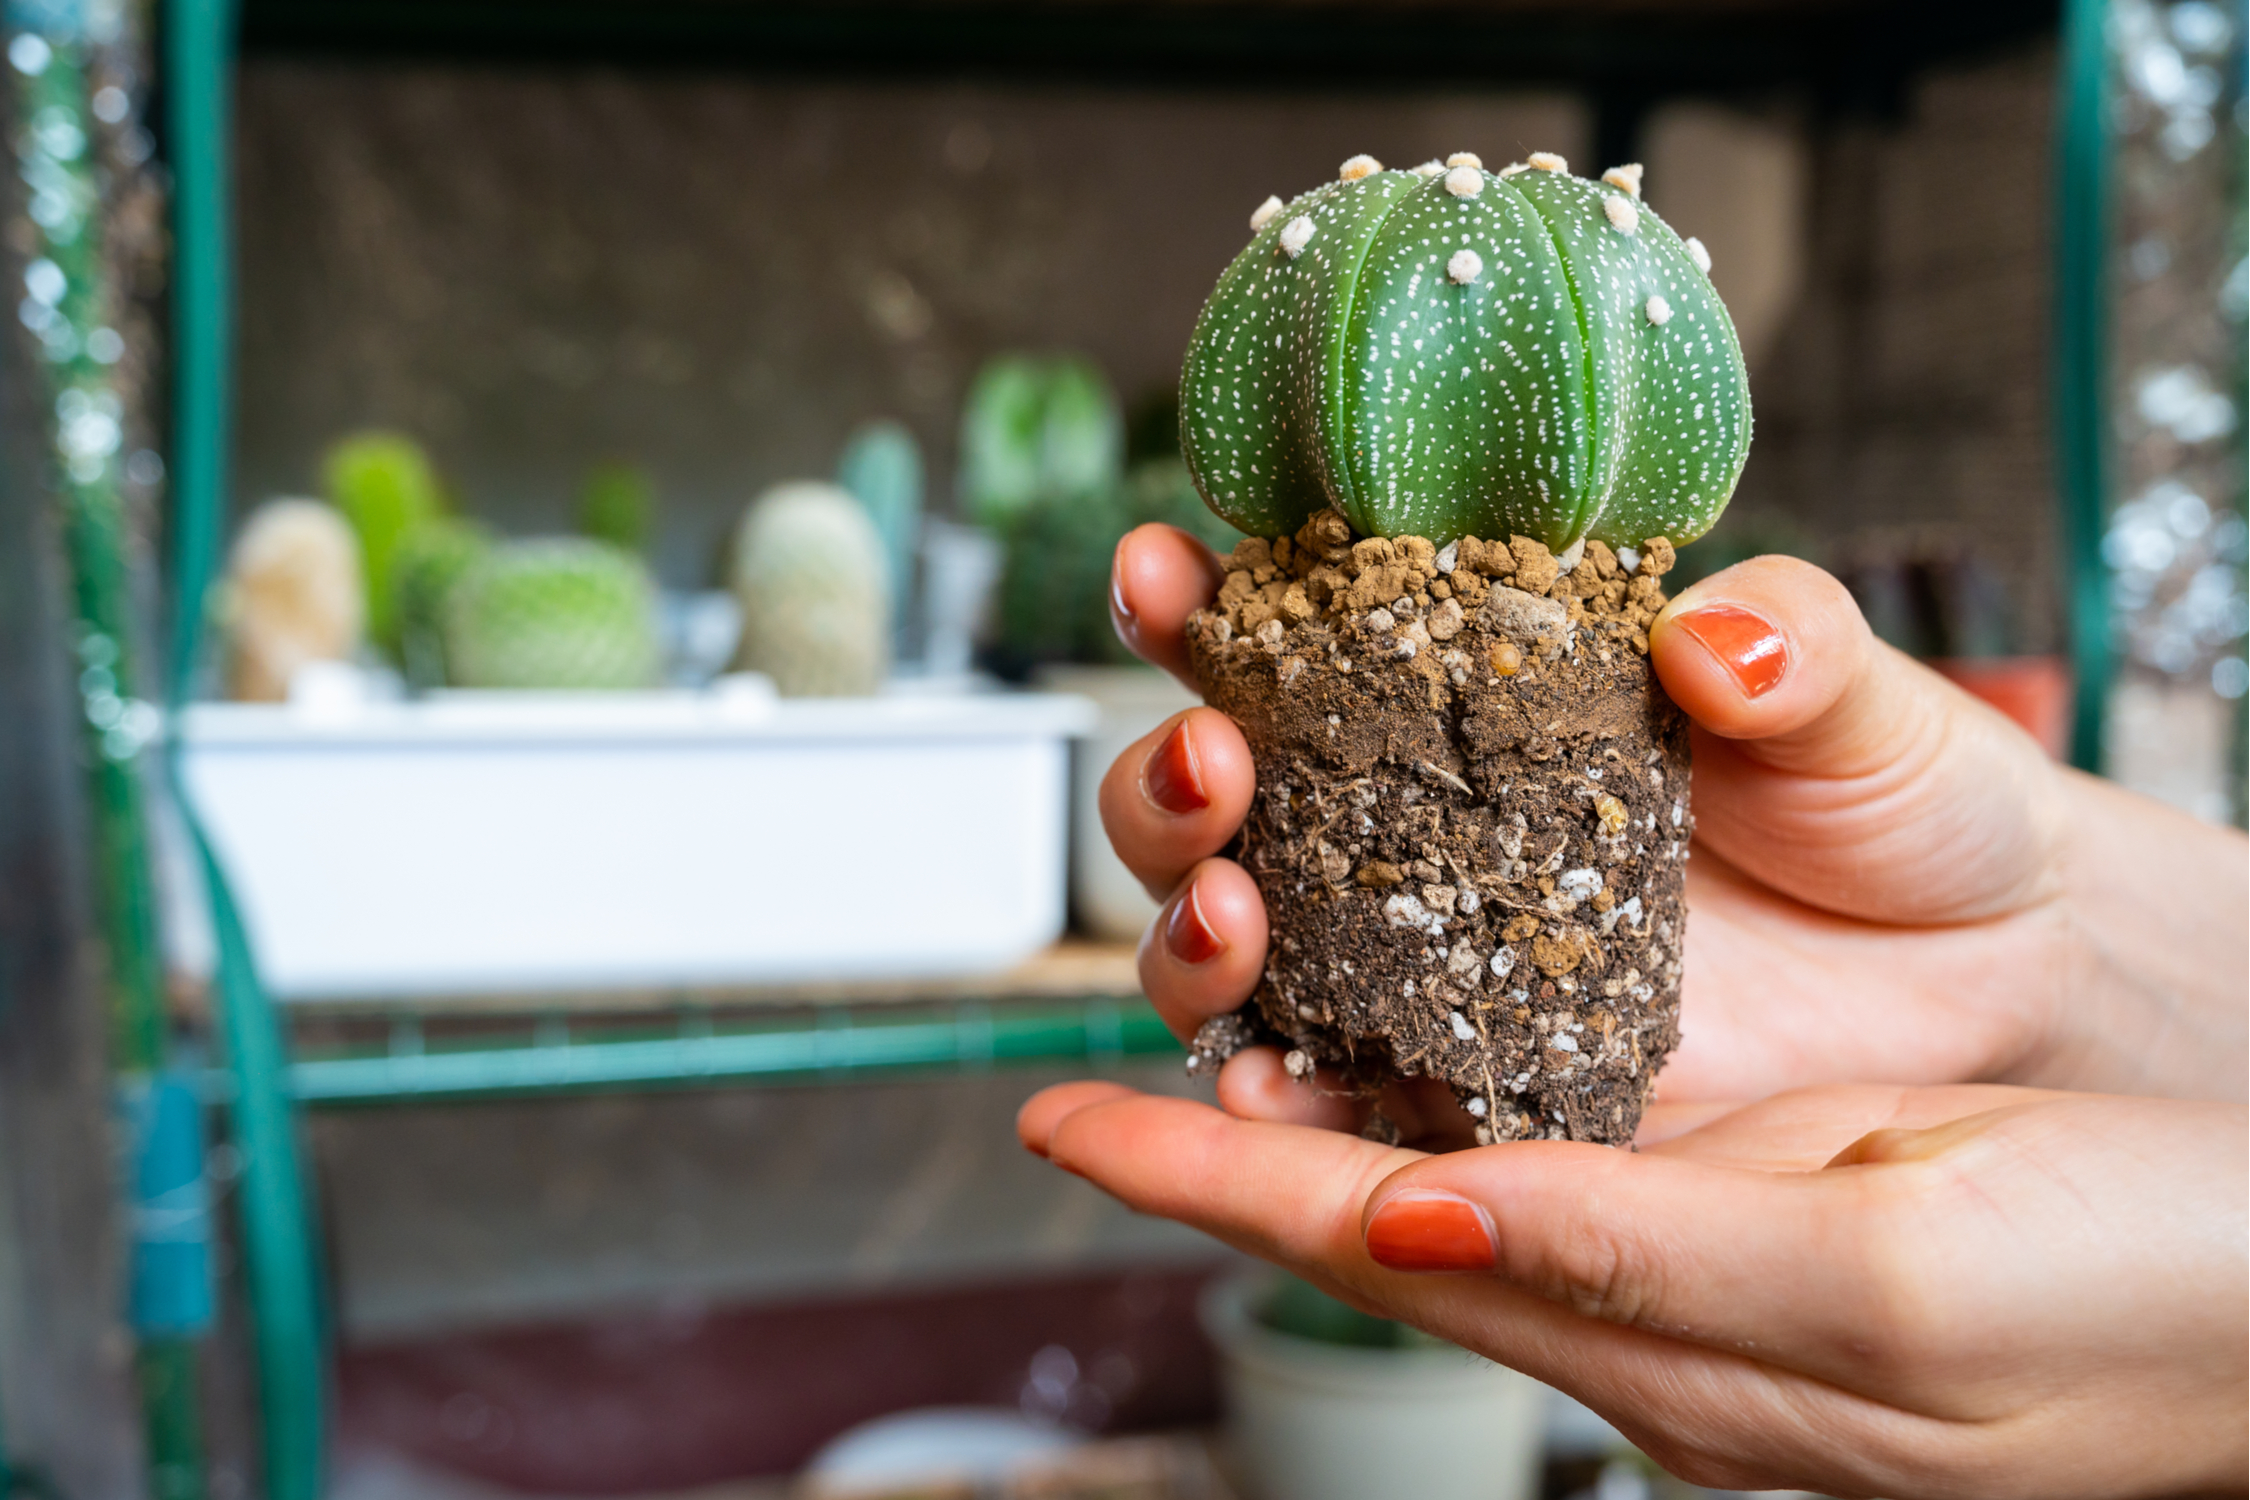 A person holding a small, unpotted cactus